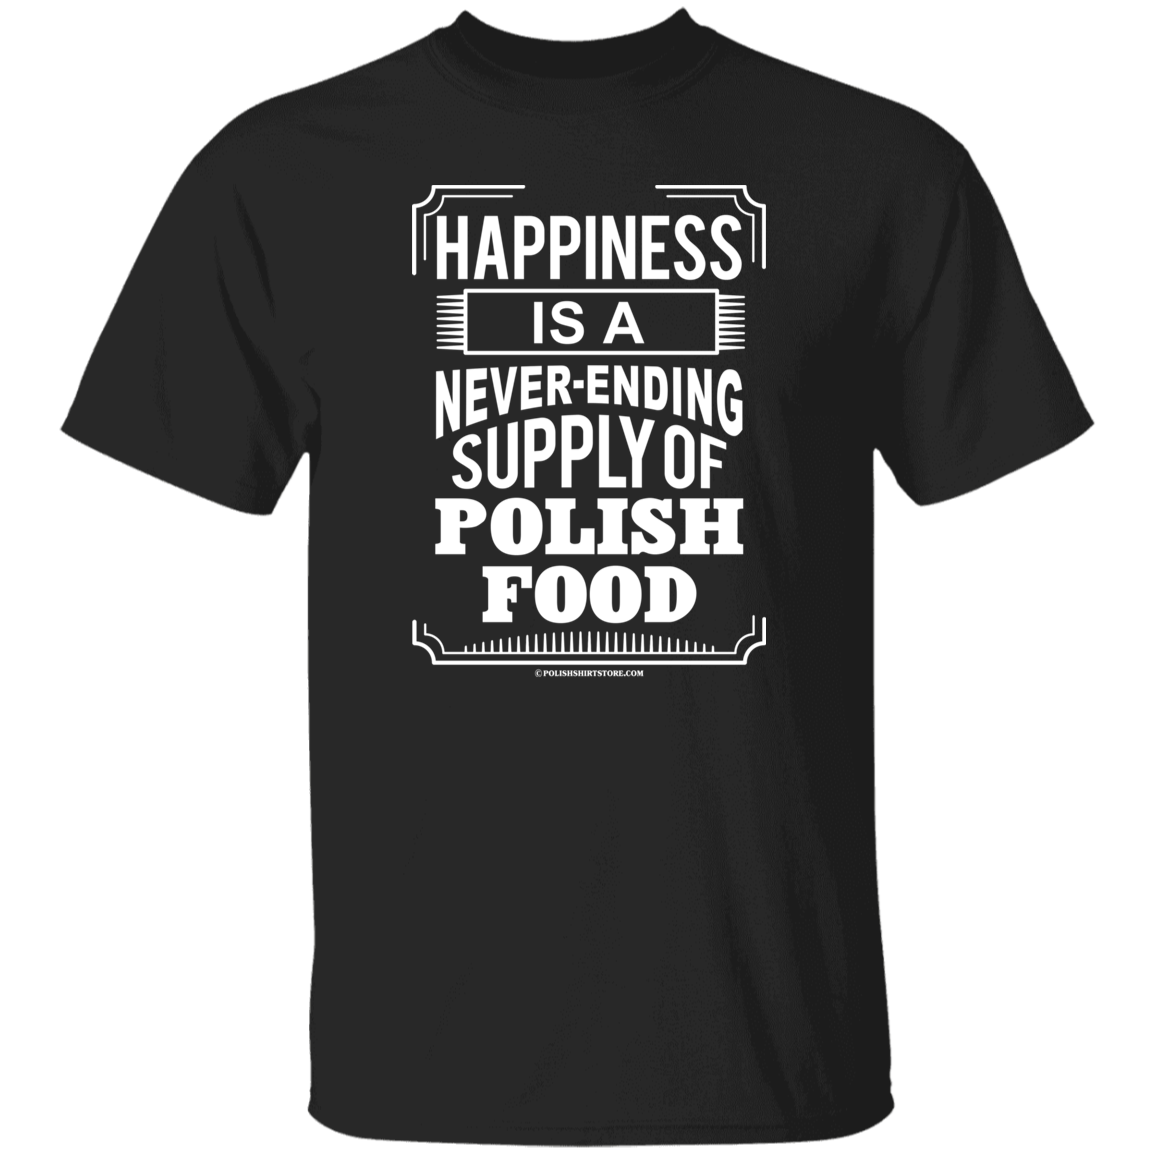 Happiness Is A Never Ending Supply Of Polish Food Apparel CustomCat G500 5.3 oz. T-Shirt Black S